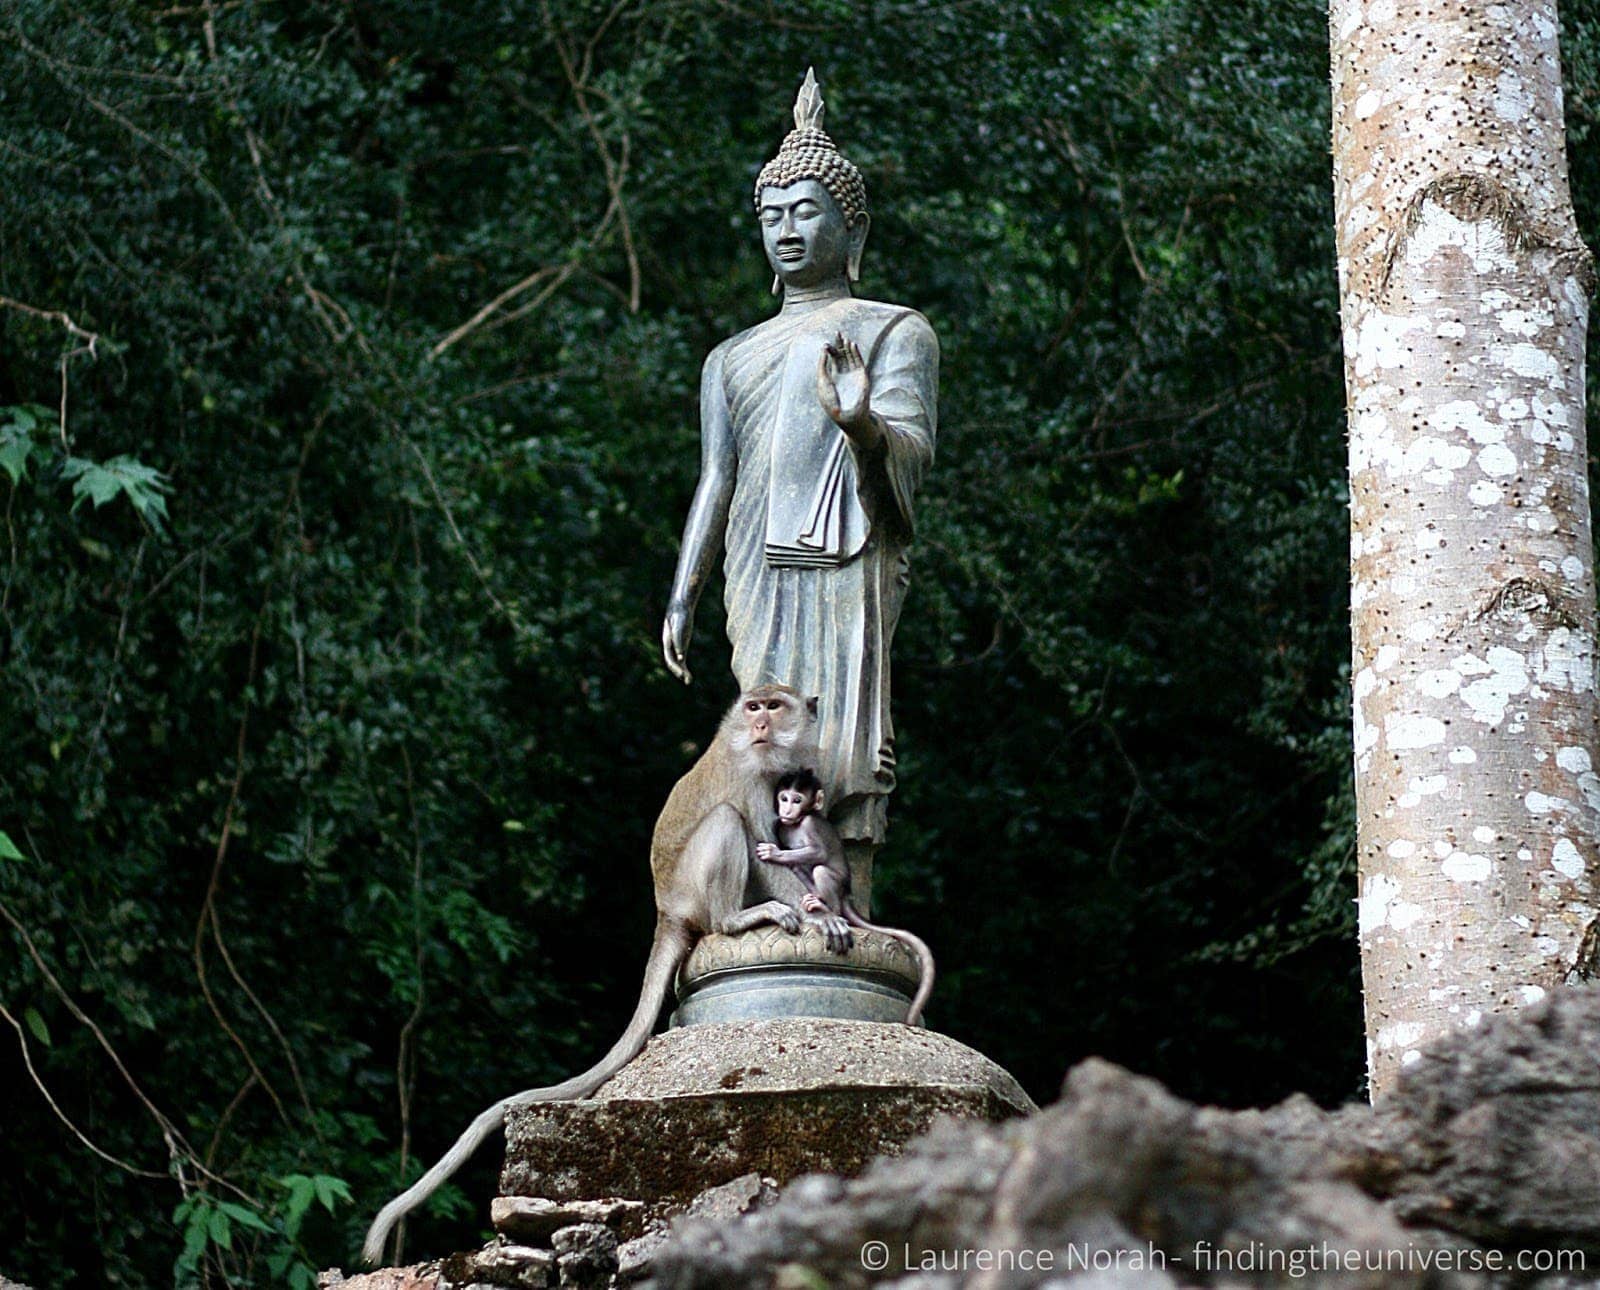 Monkey, baby and buddha statue in Khao Sok National Park Thailand